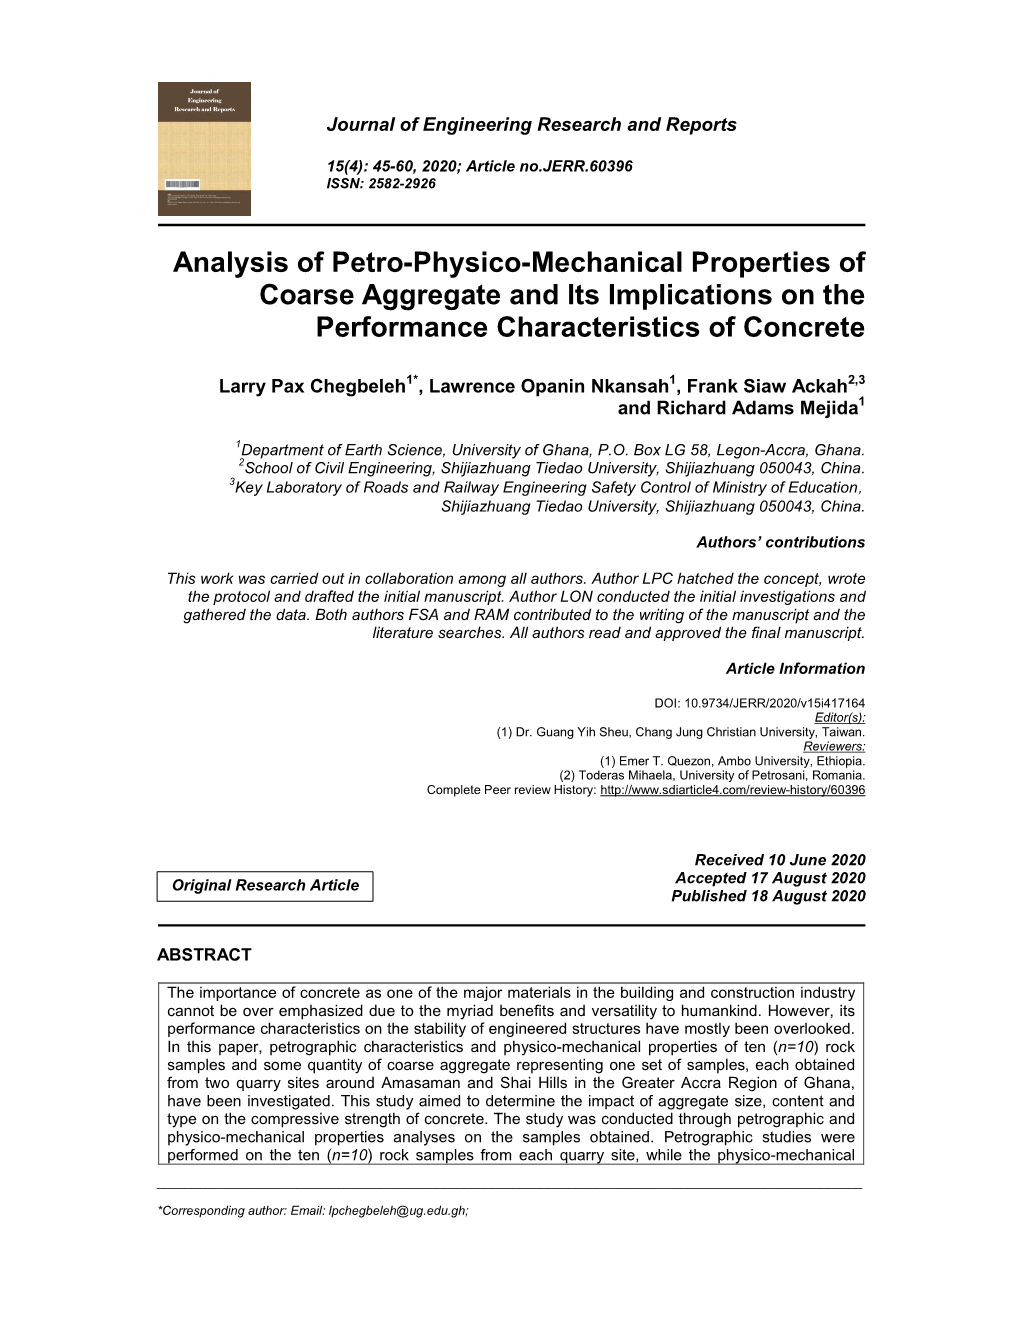 Analysis of Petro-Physico-Mechanical Properties of Coarse Aggregate and Its Implications on the Performance Characteristics of Concrete